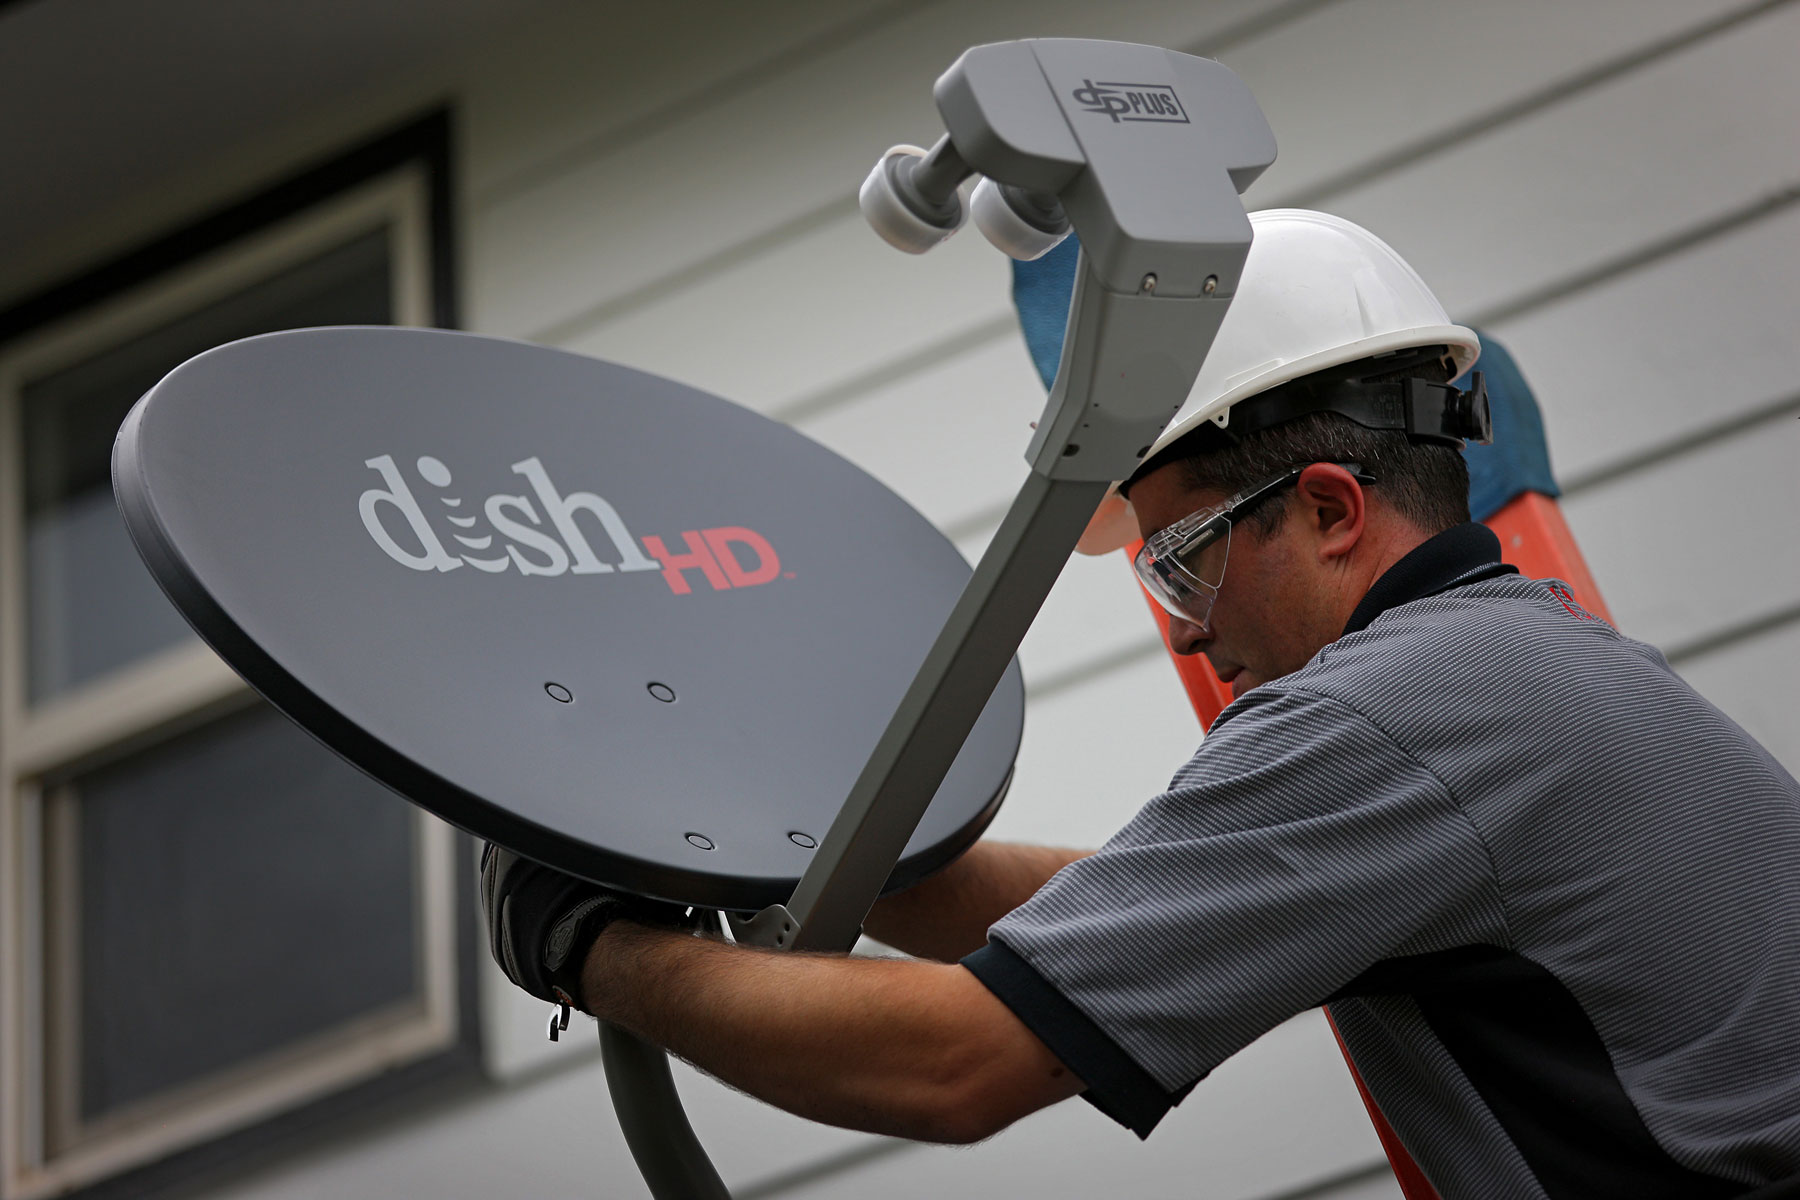 Ride Along With During A Dish Network Installation Amidst A Pay-TV Merger Speculation